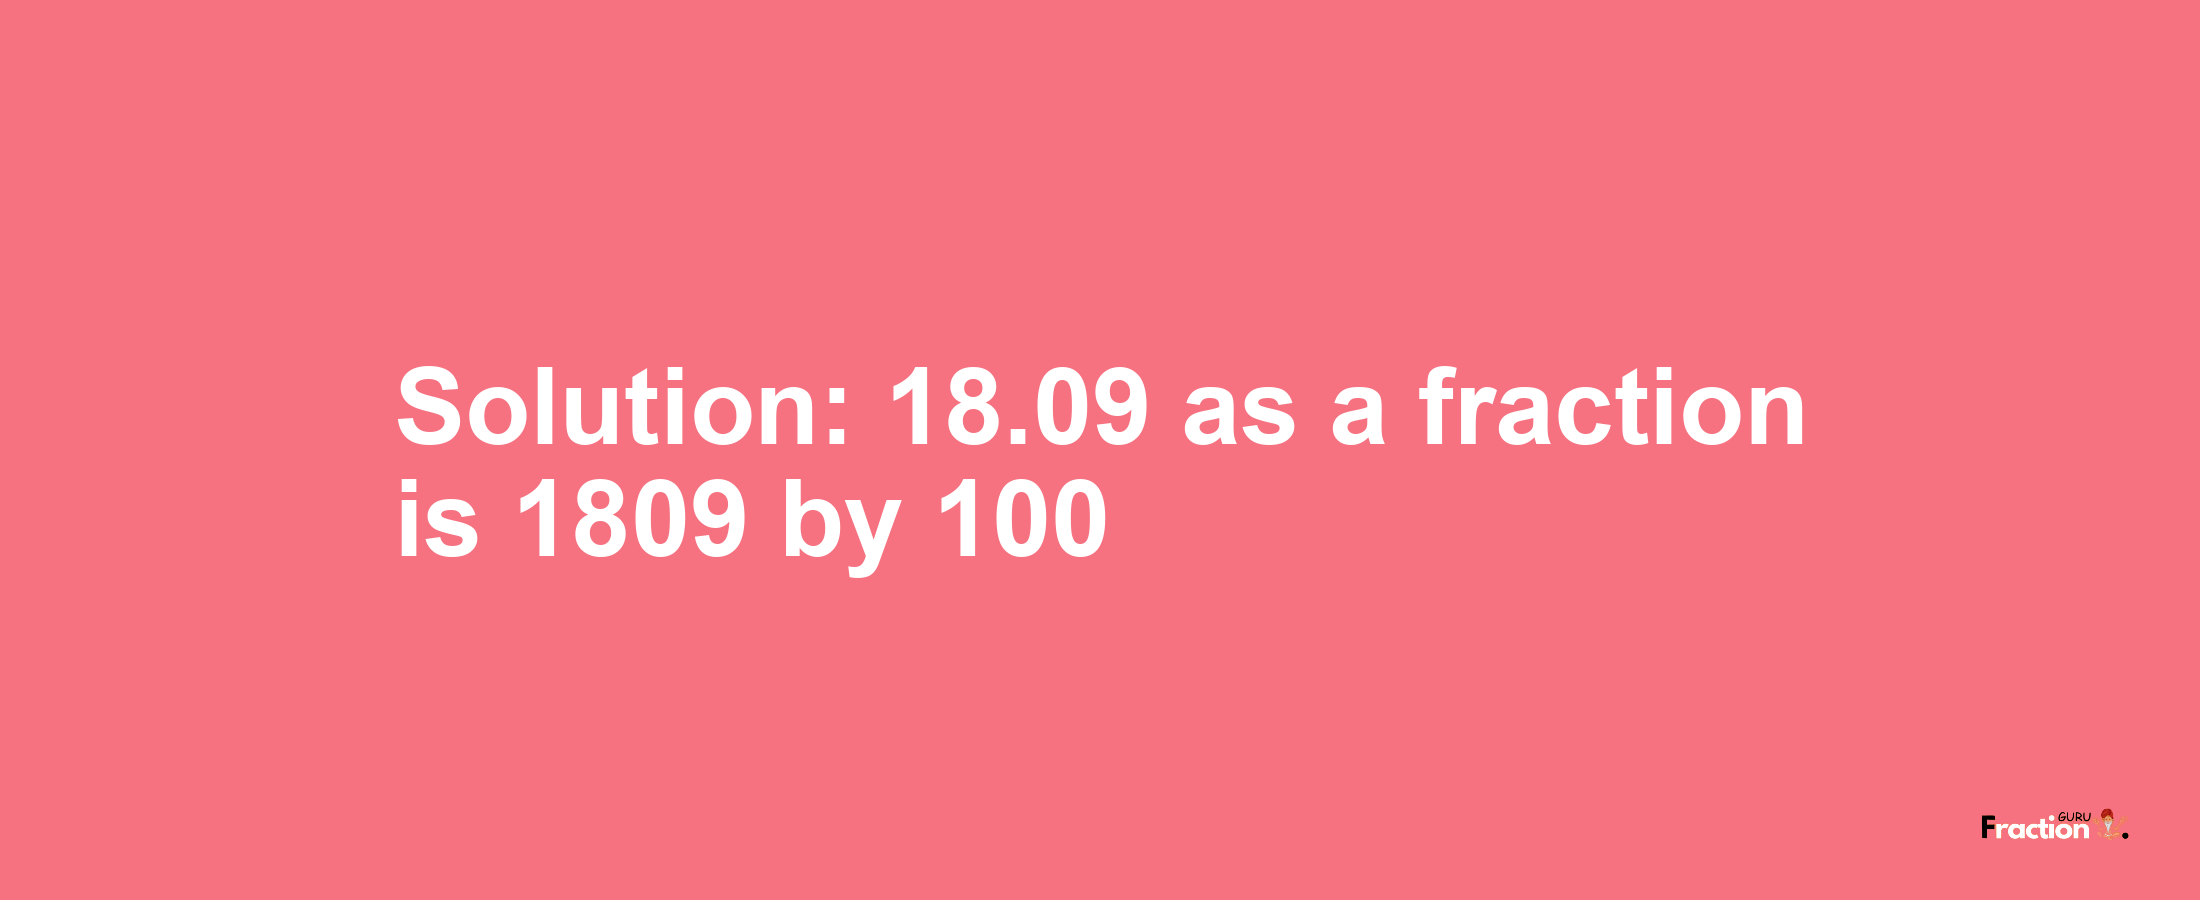 Solution:18.09 as a fraction is 1809/100